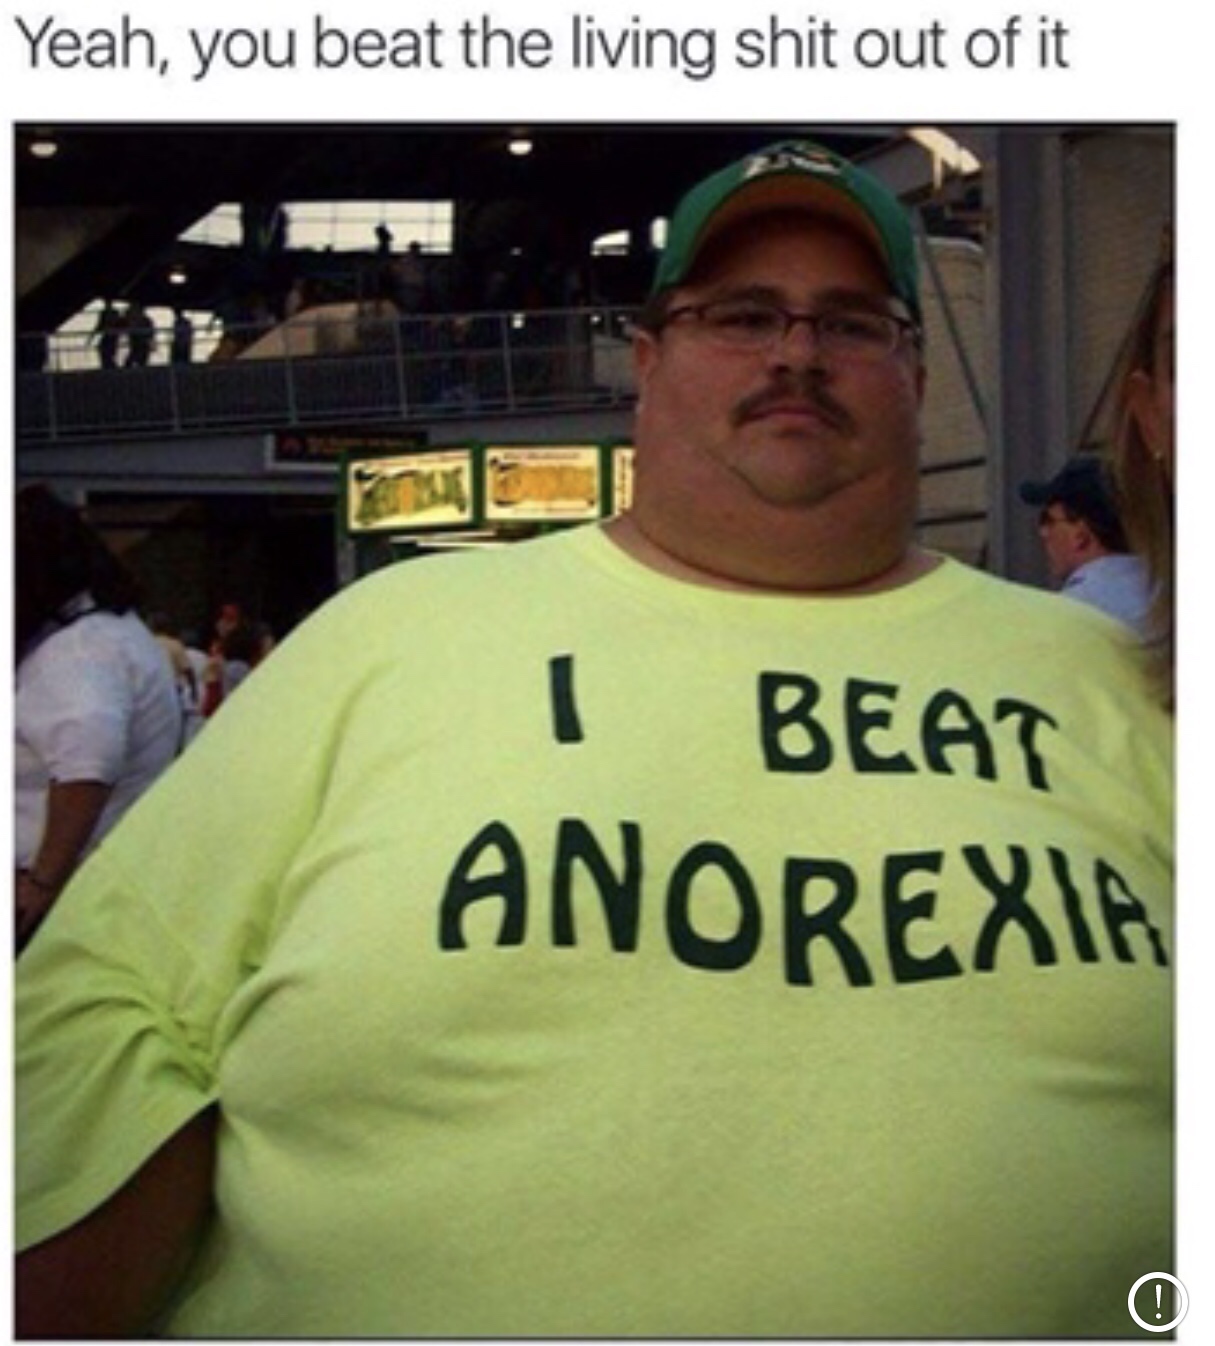 beat anorexia - Yeah, you beat the living shit out of it 1 Beat Anorexia